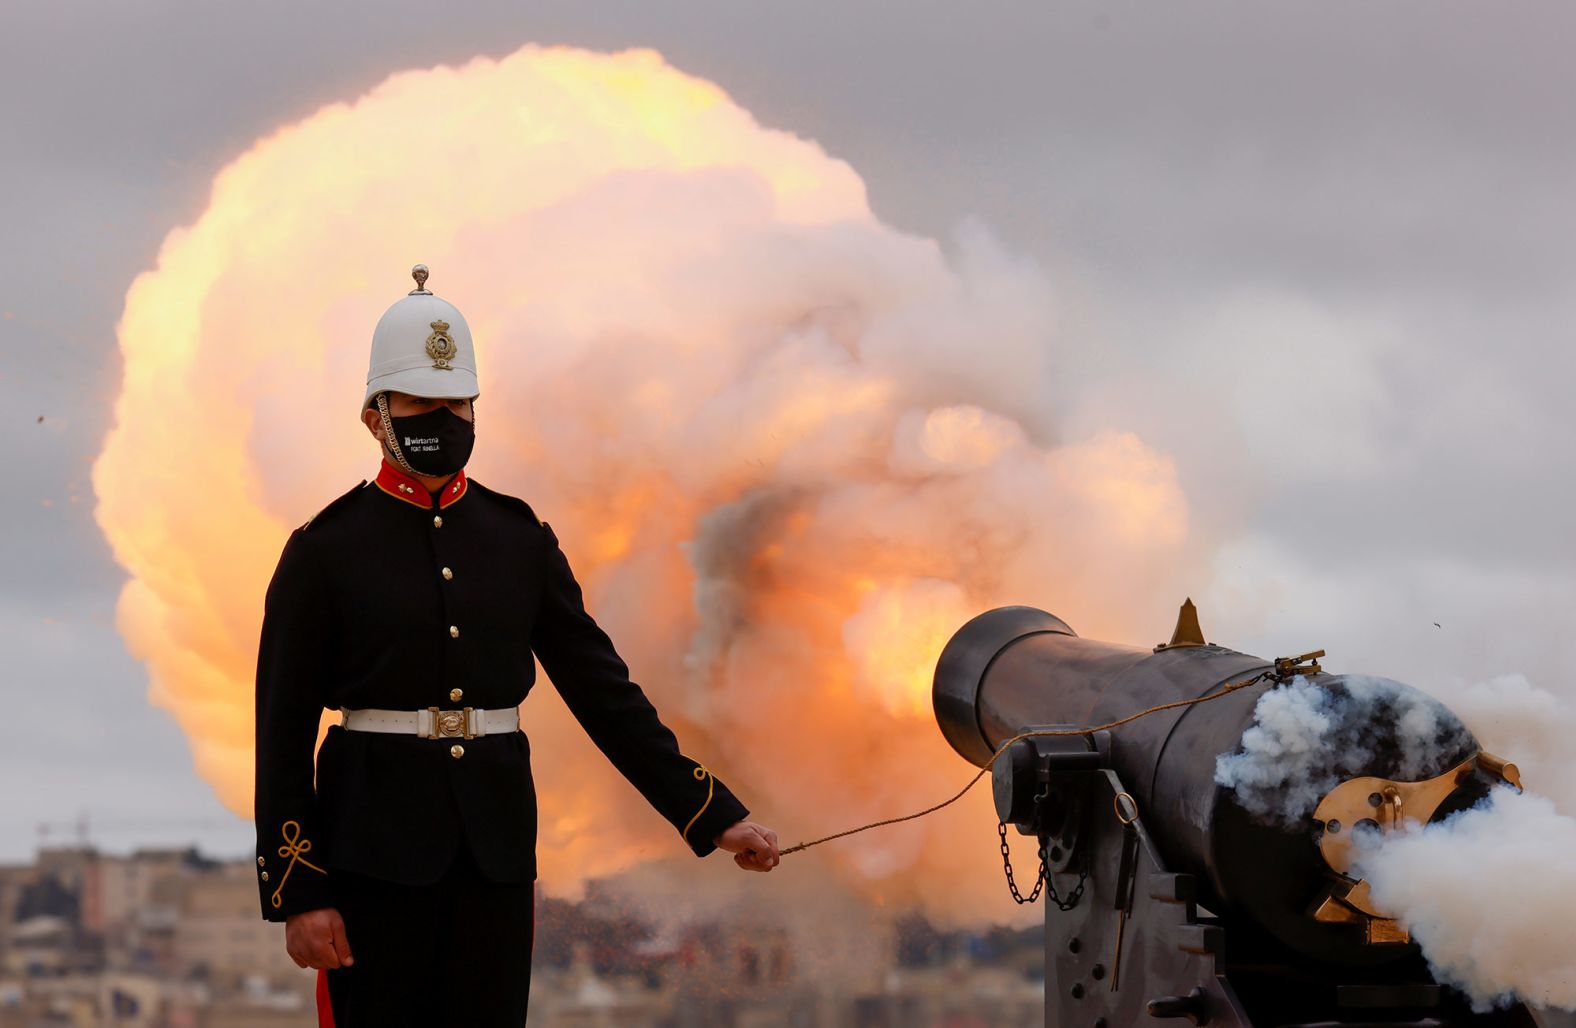 A nine-gun salute is fired in Valletta, Malta, to honor Prince Philip before his funeral.